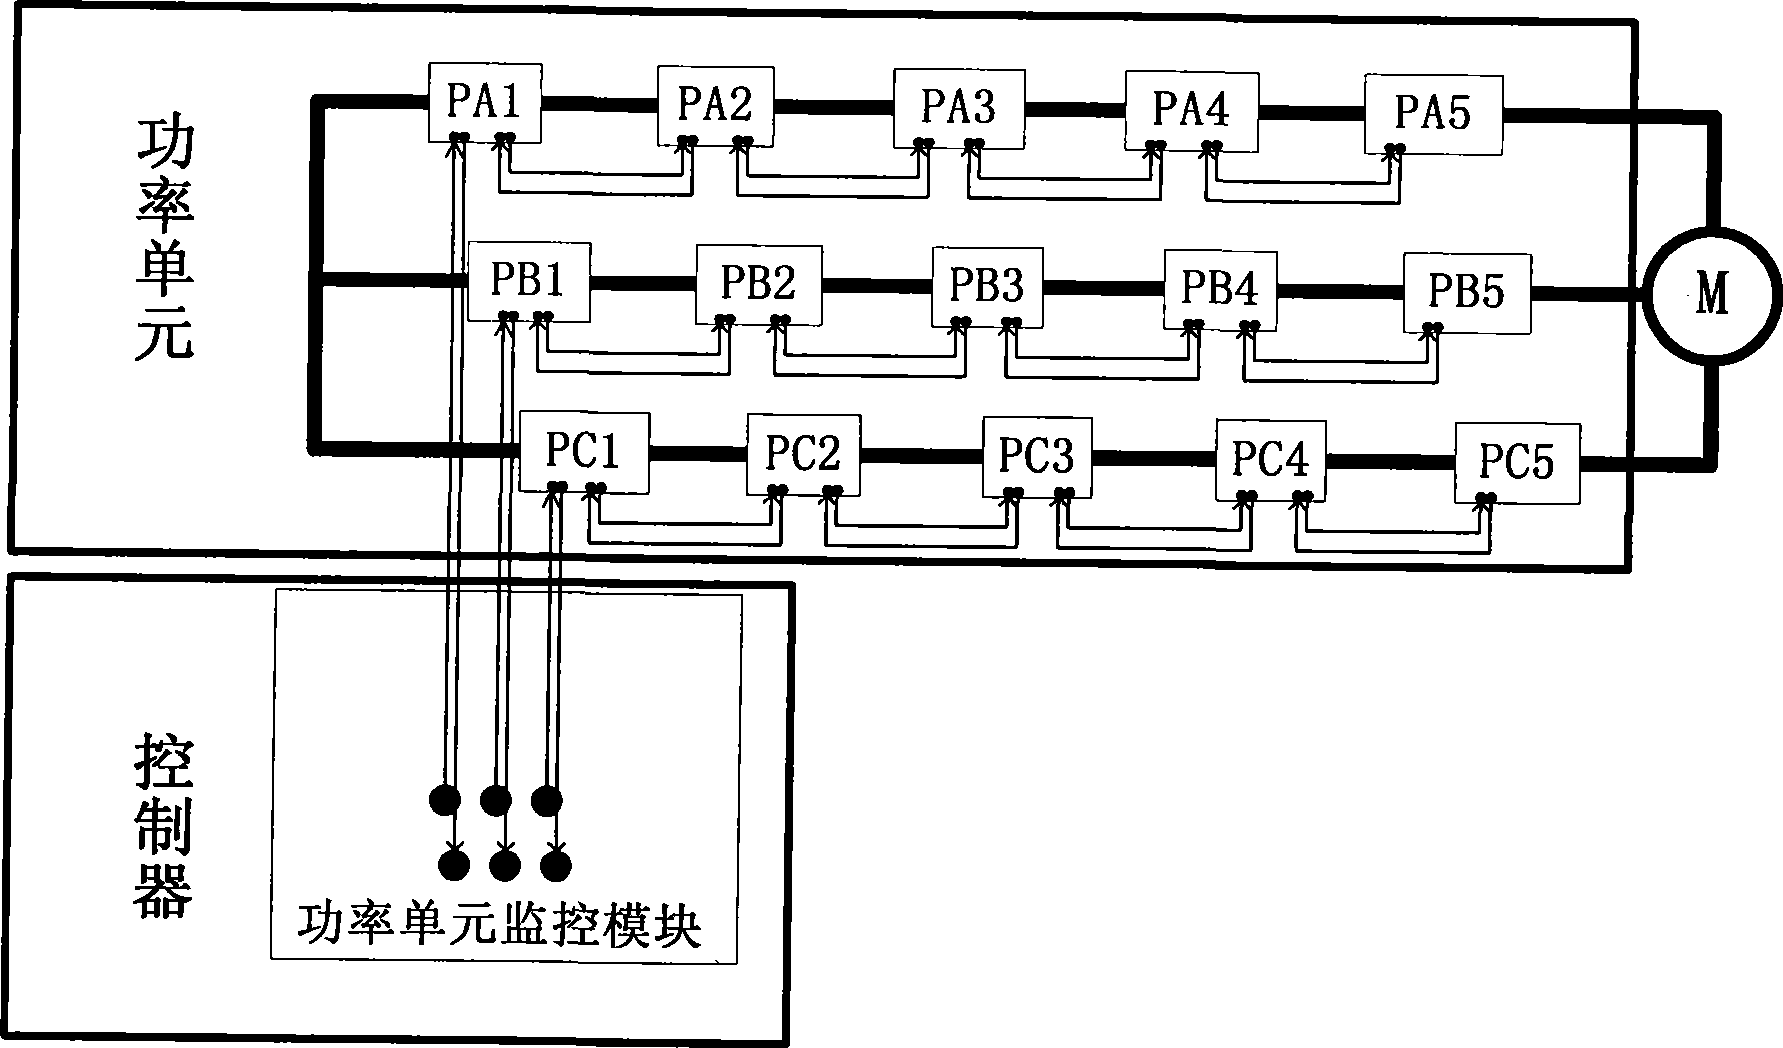 Pulse controlling and state monitoring device for H bridge cascade high voltage transformer power unit